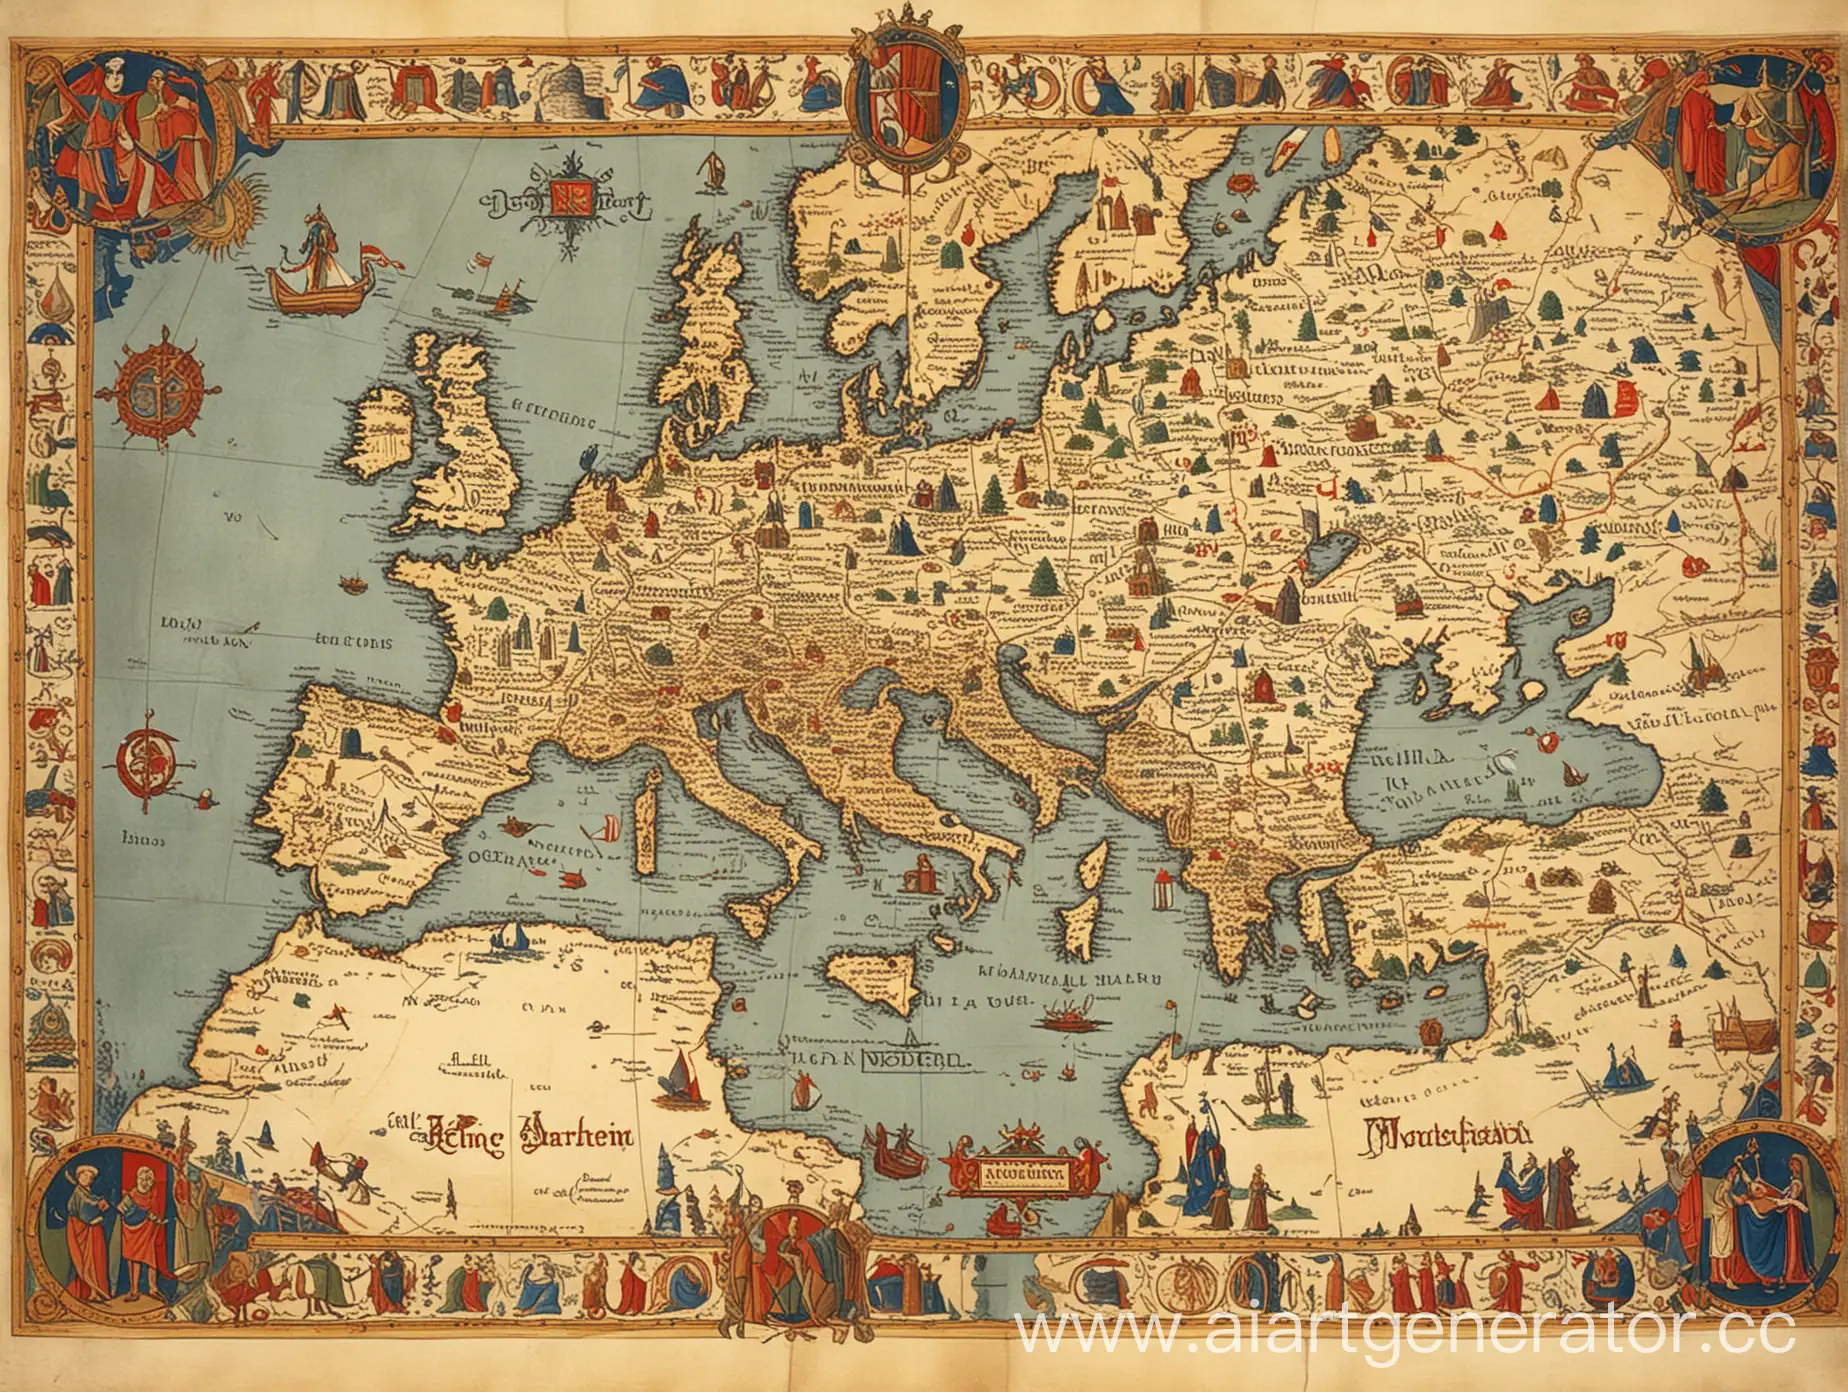 Detailed-Medieval-World-Map-Illustrating-Kingdoms-and-Trade-Routes